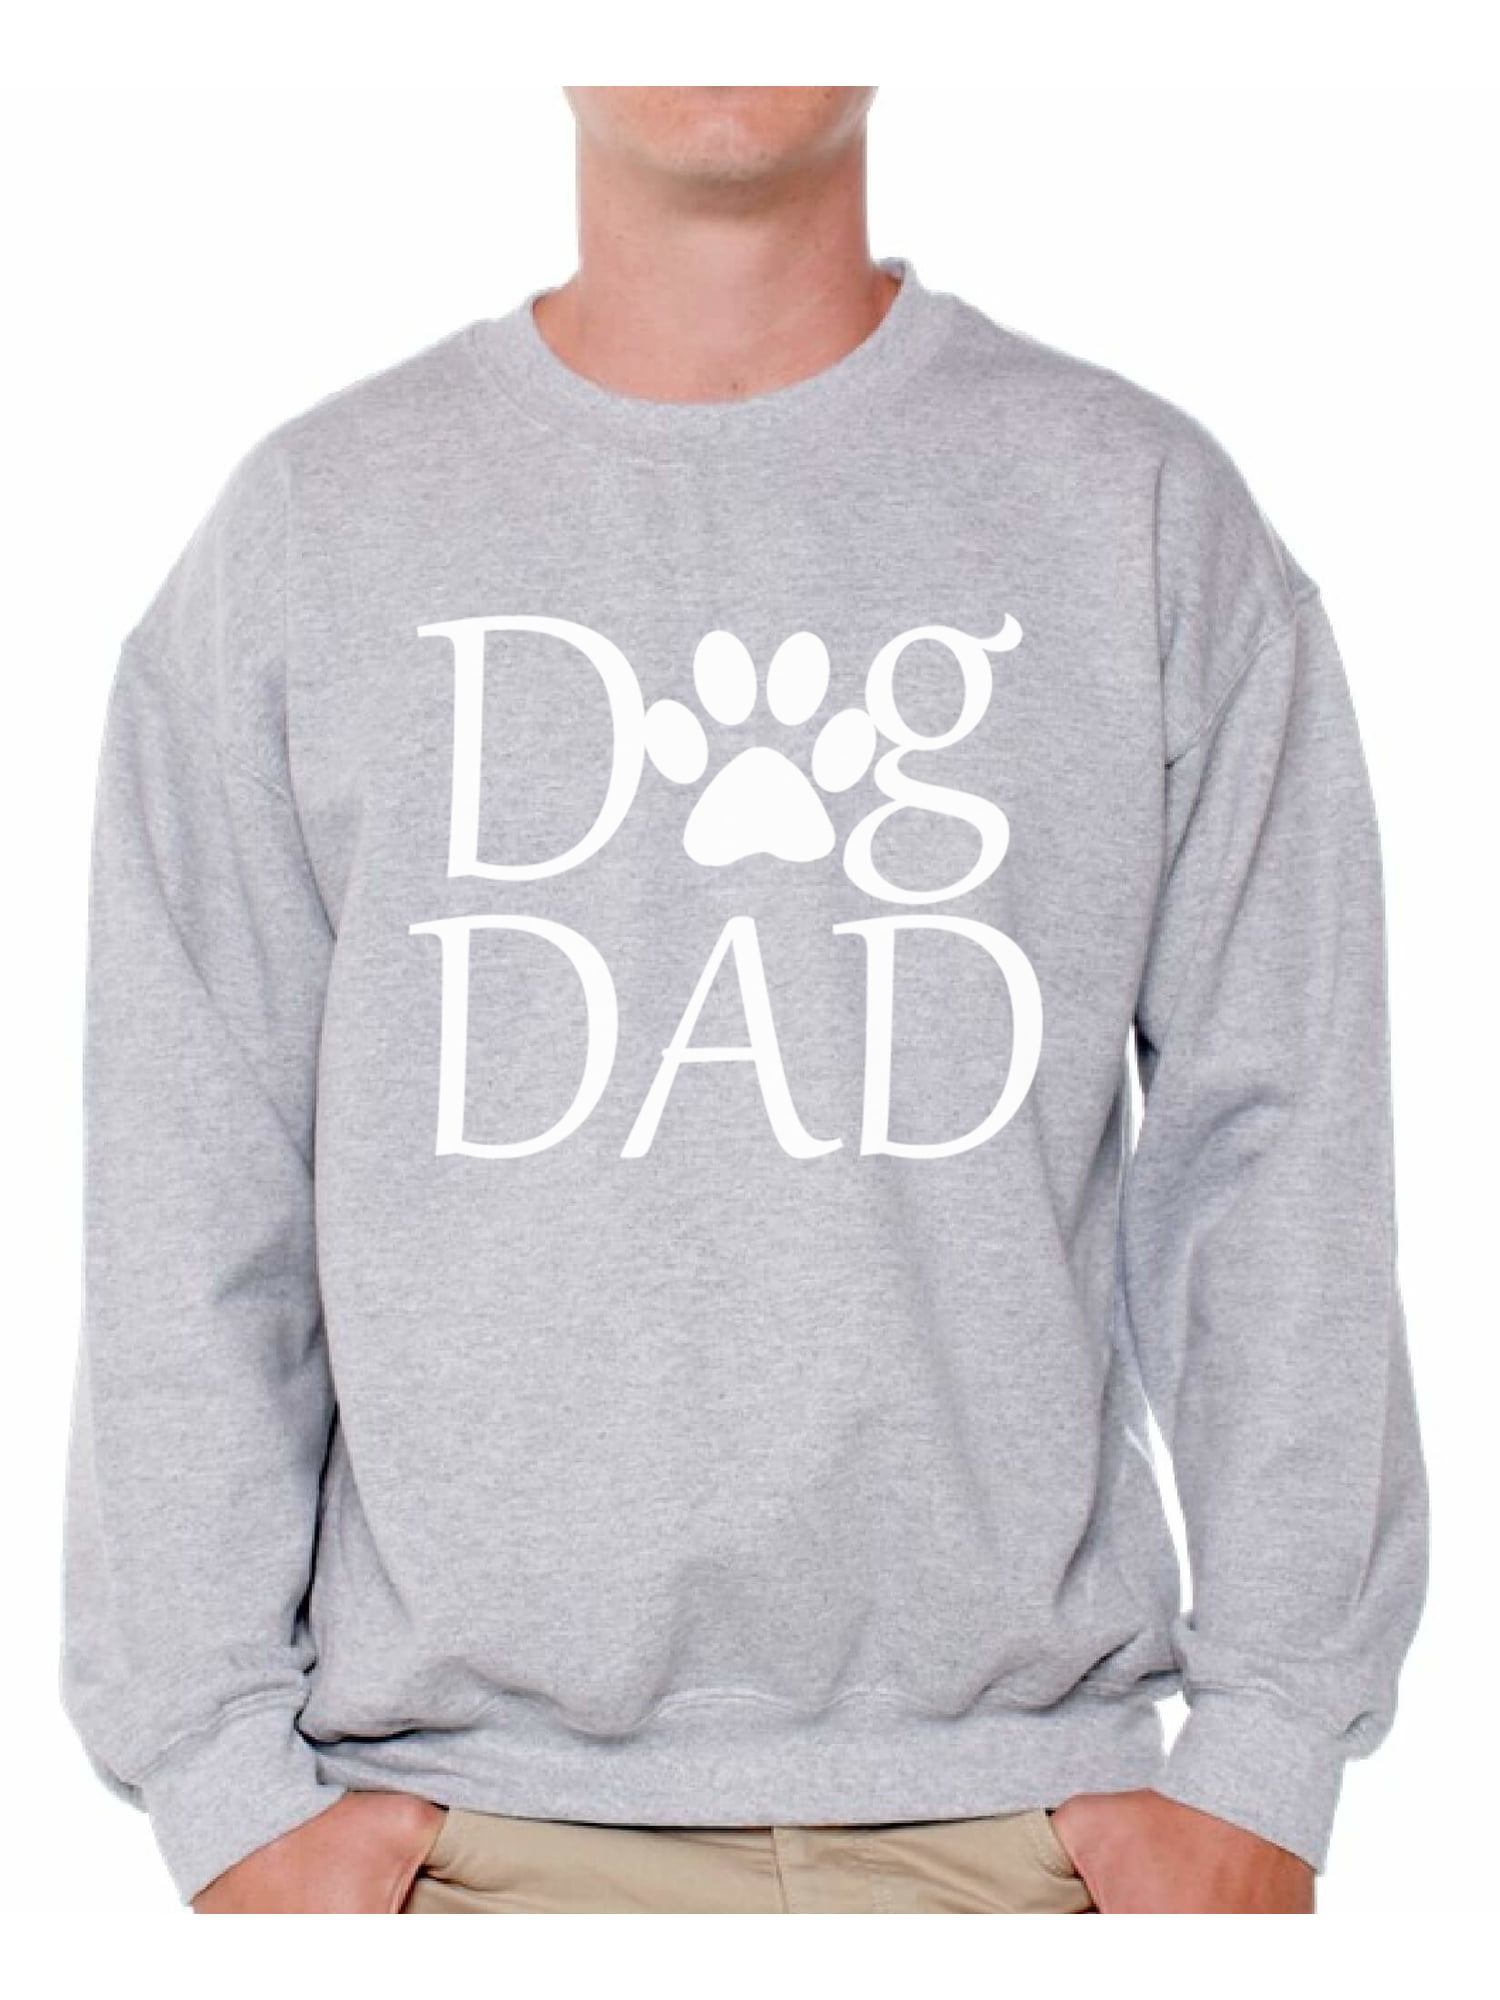 Dog Dad Sweatshirt Crewneck Pet Lover Father`s Day Gift Dog Lover Gift For Him